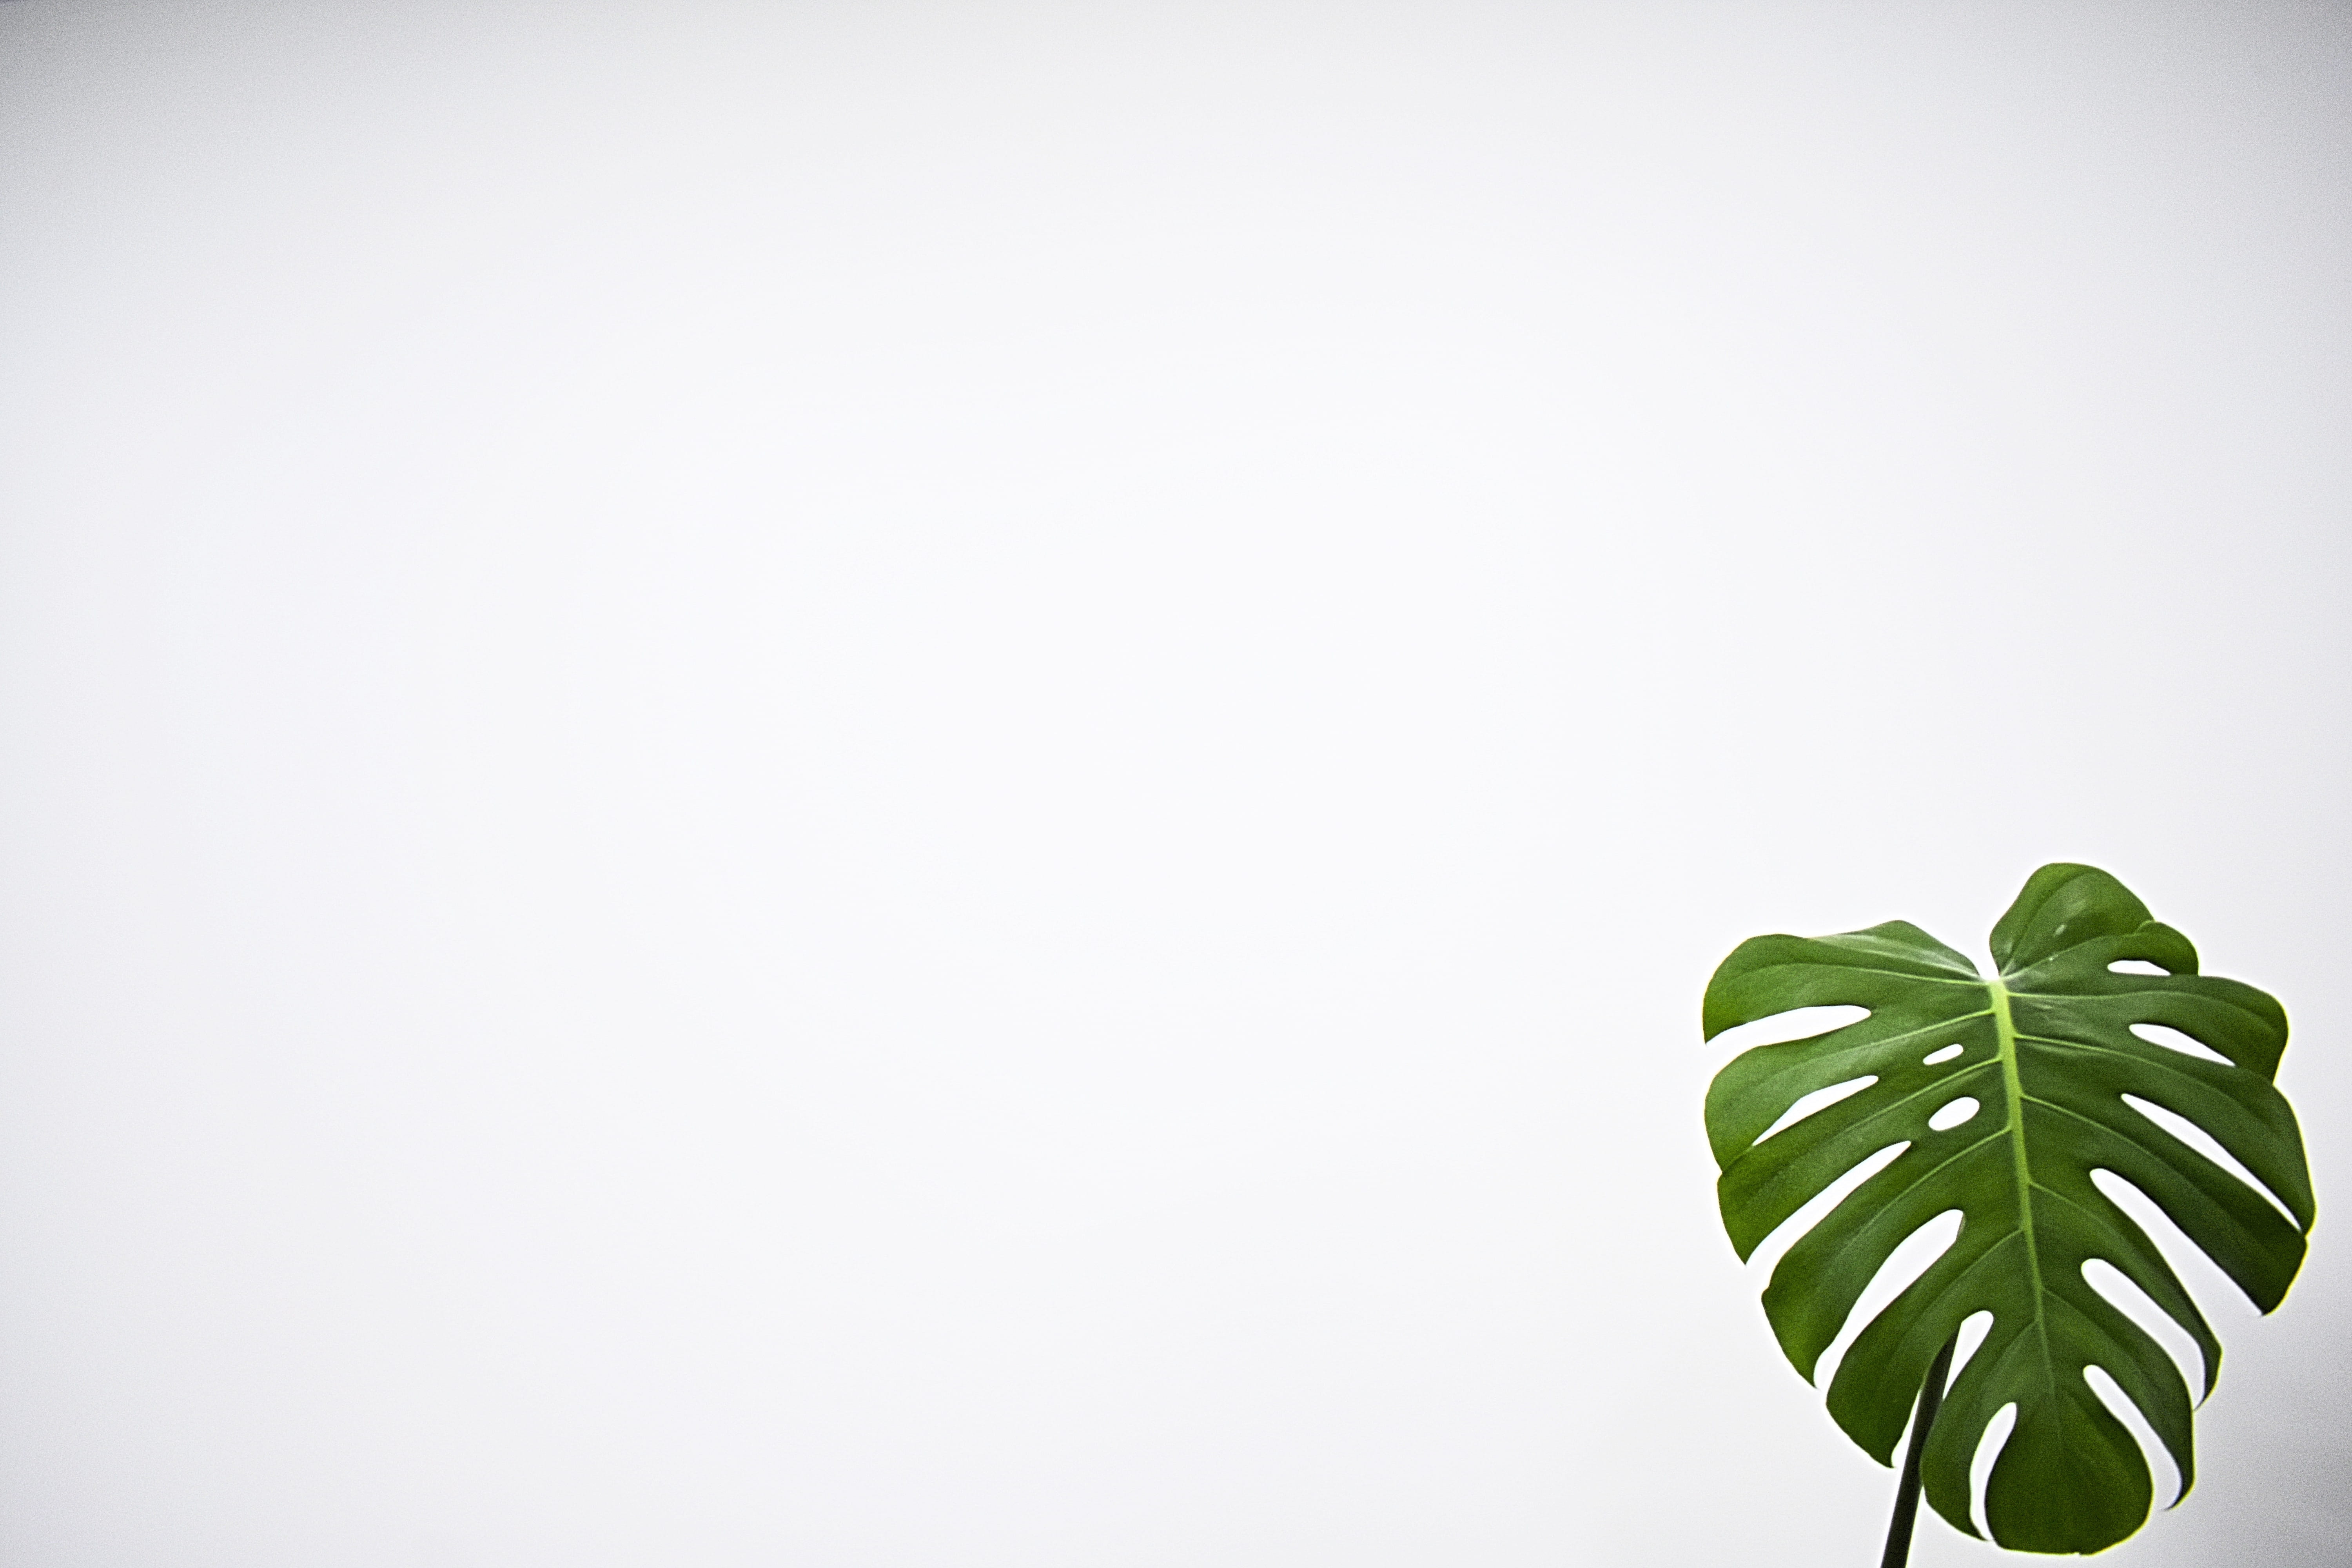 green leaf with white background, plant, fern, flora, veins, blank space